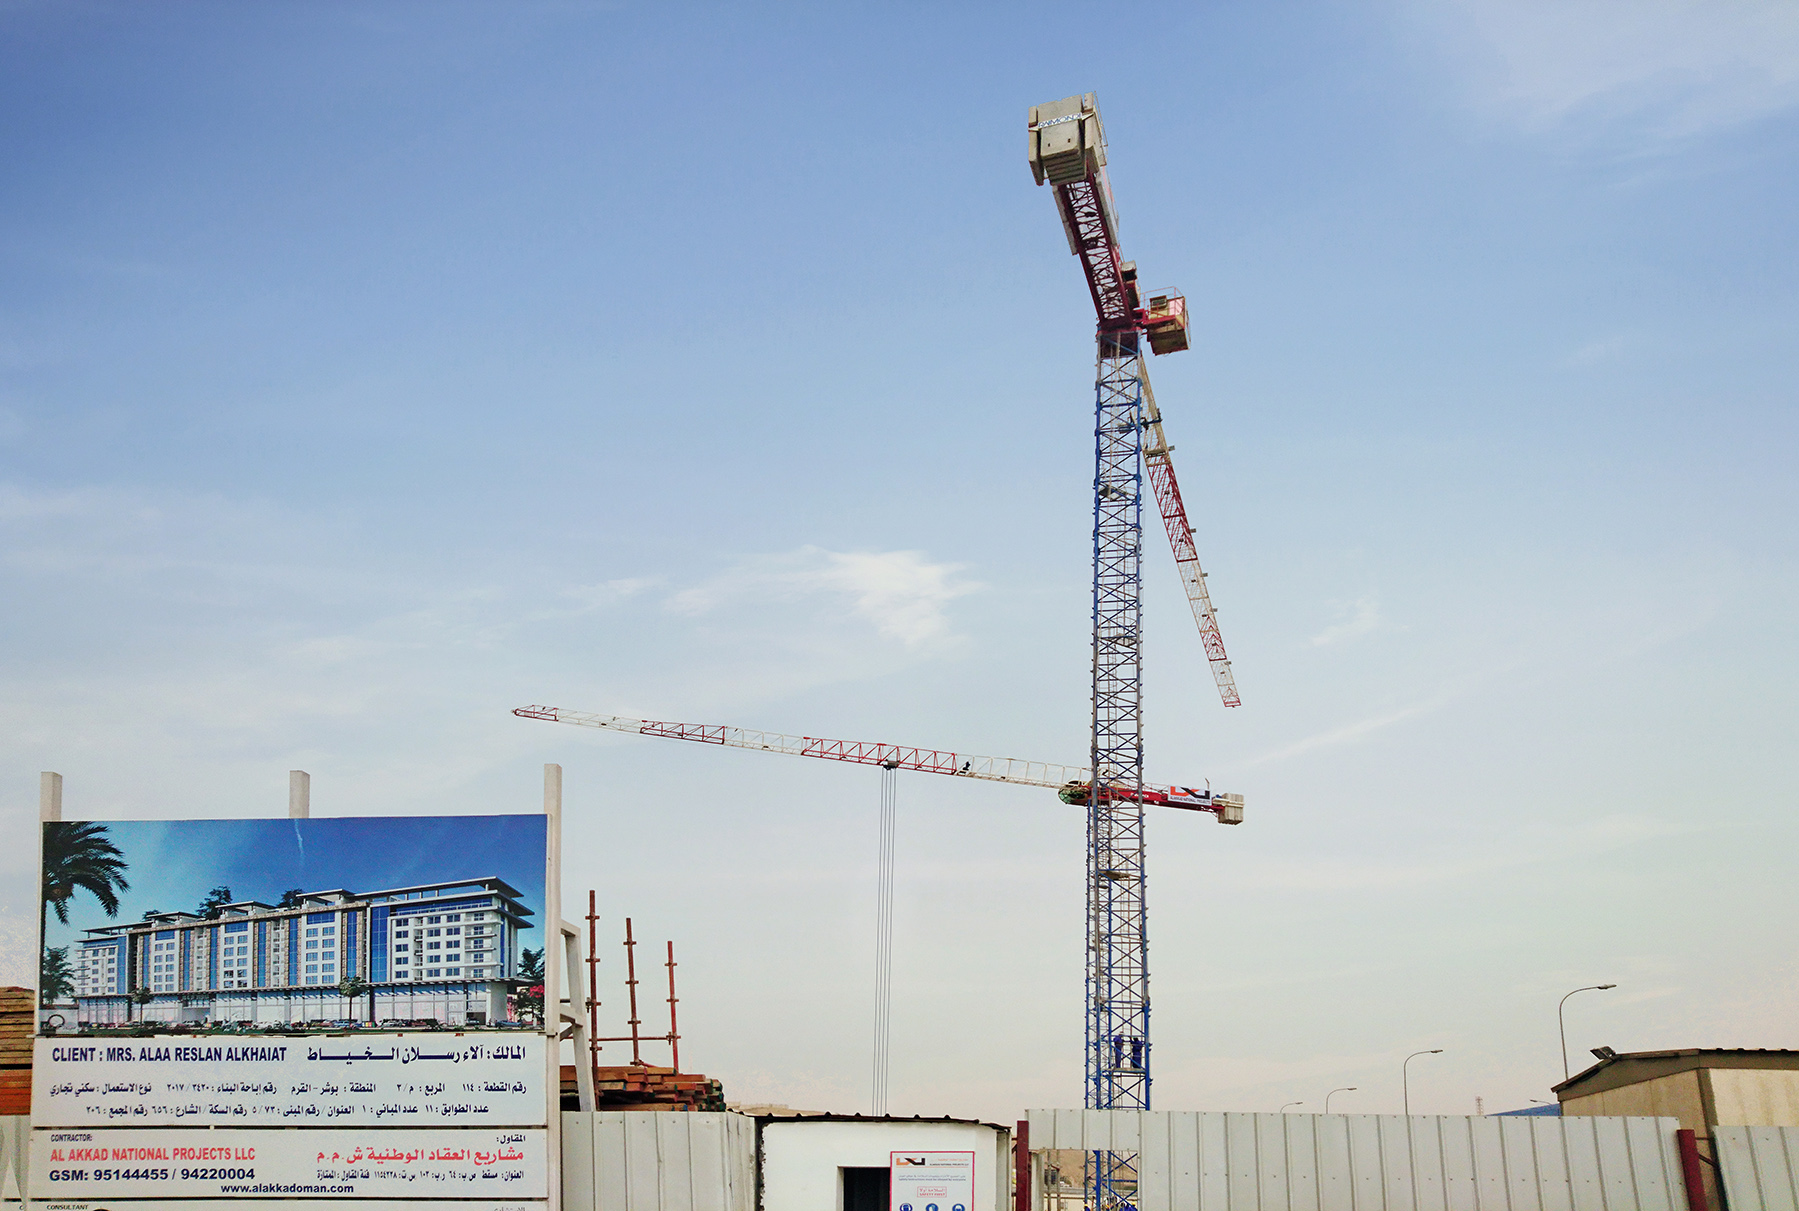 Heavy Lift News: Tower cranes used for development work in Oman